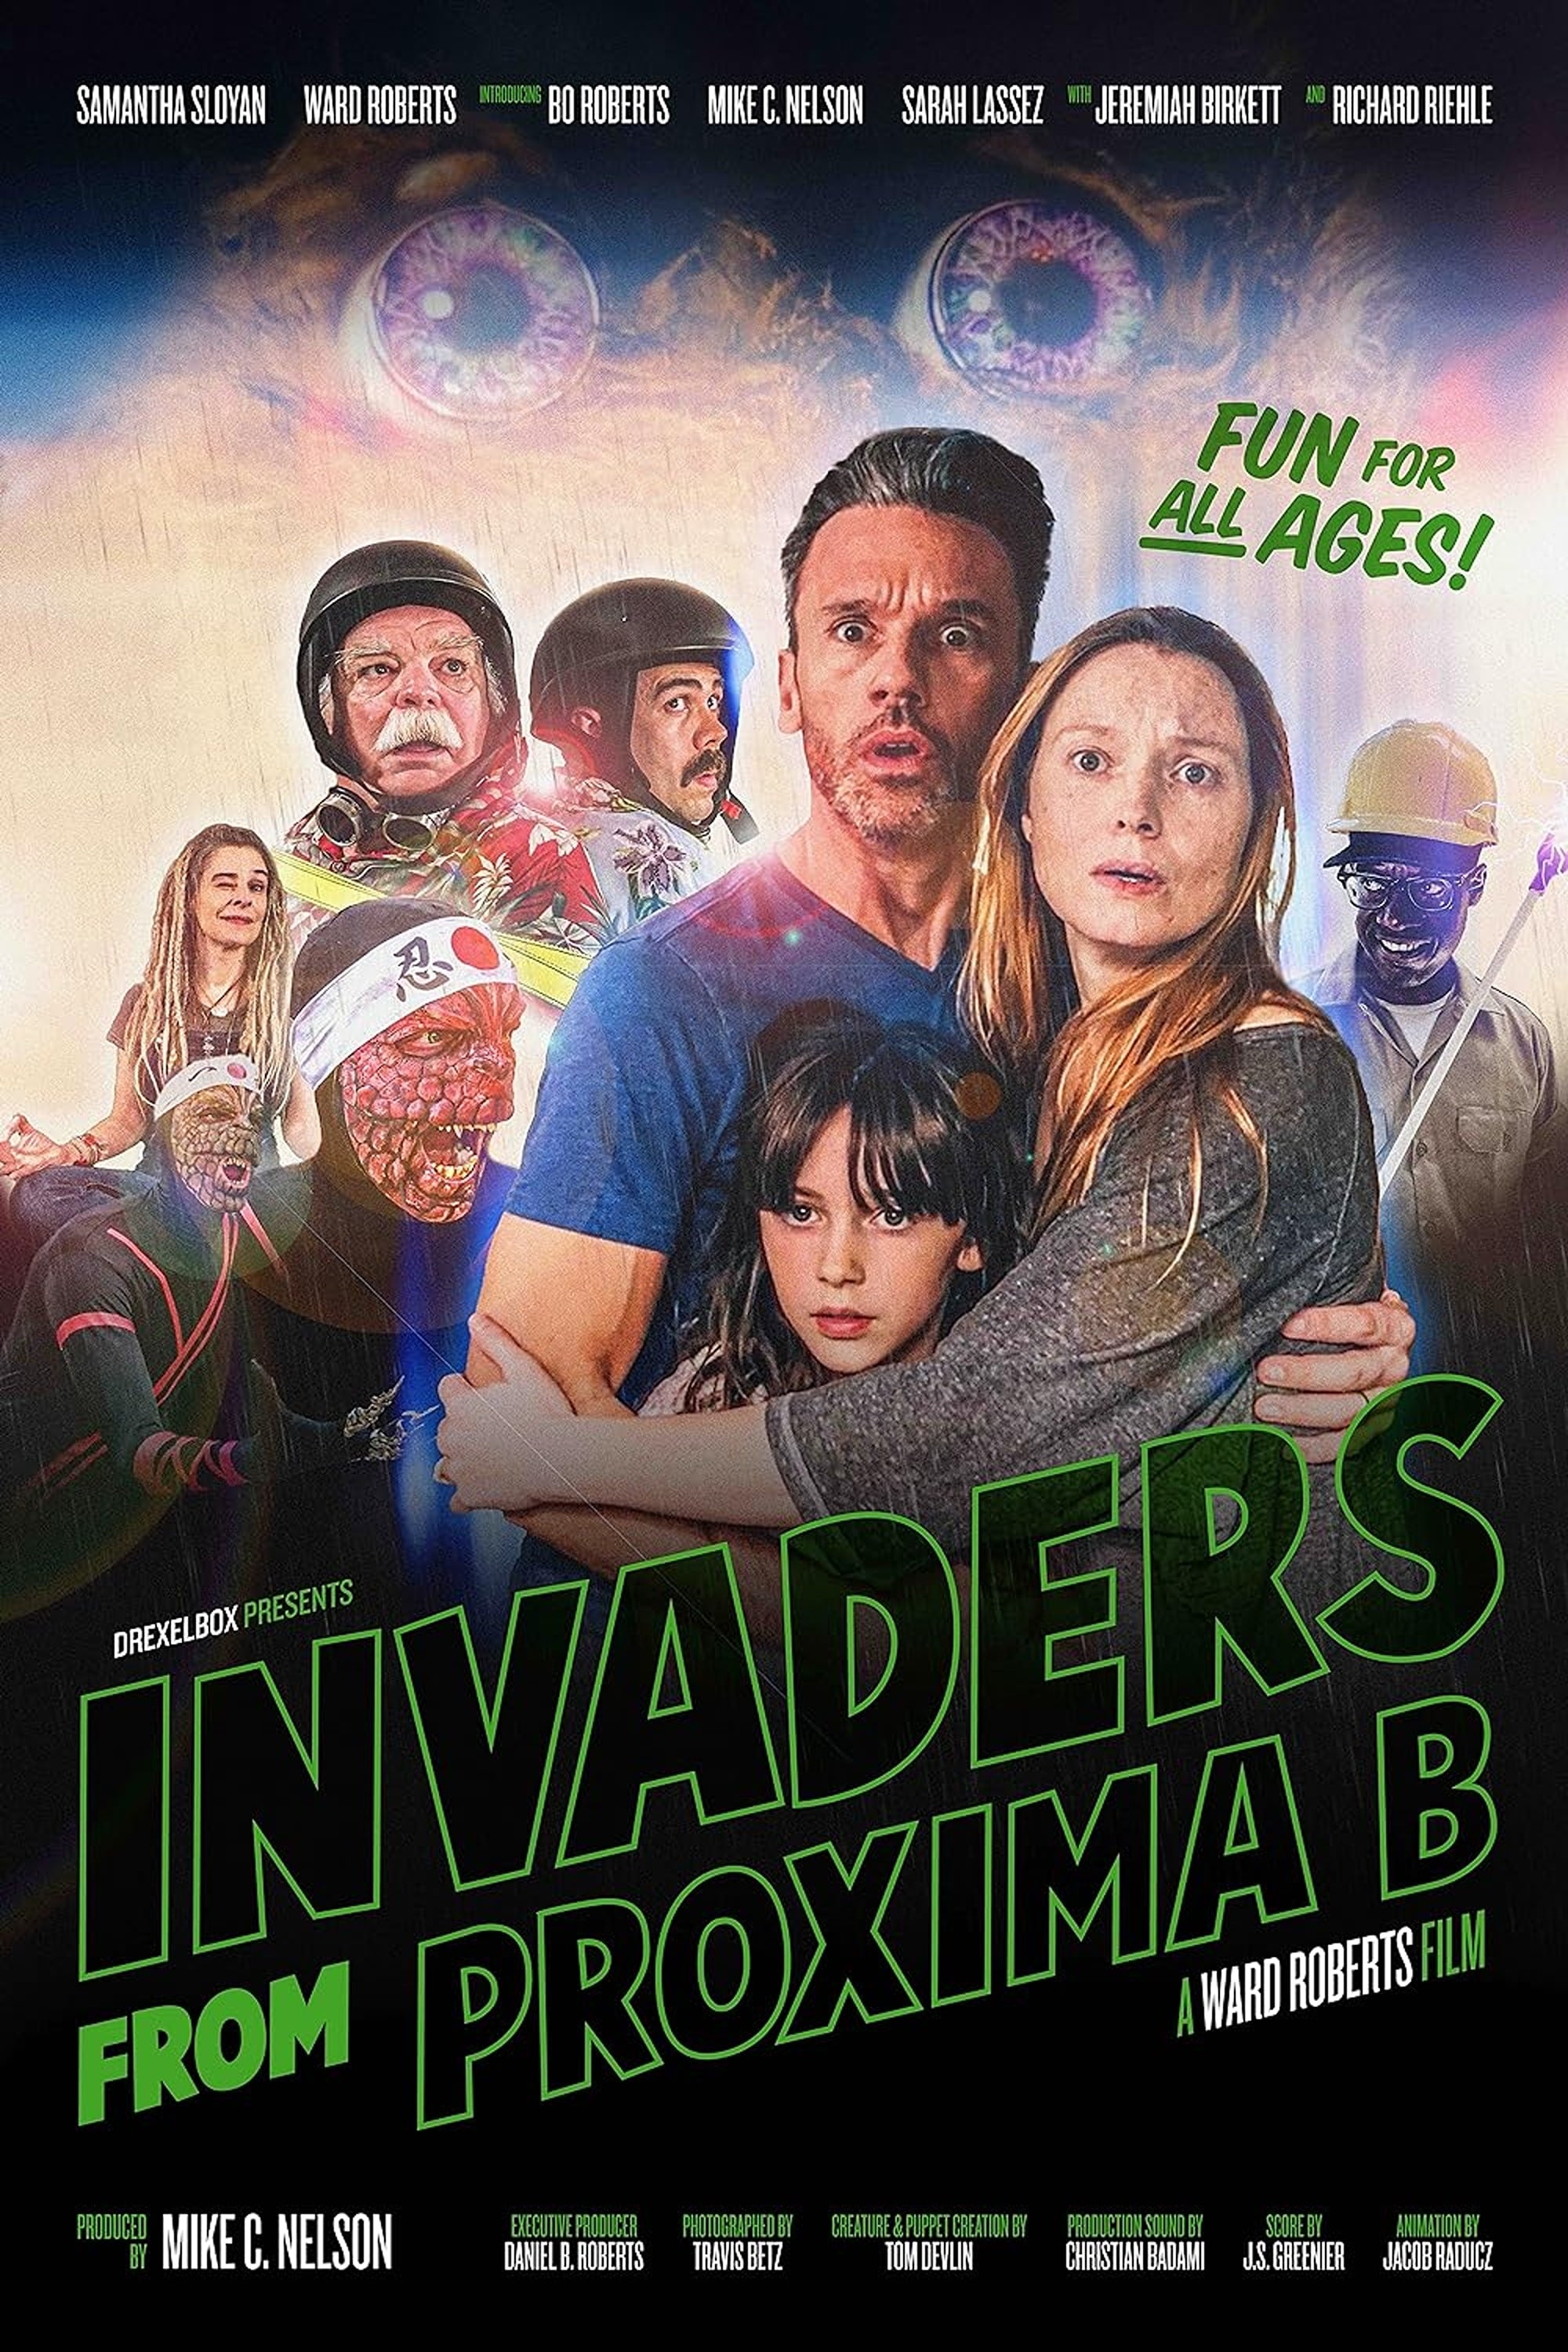 Invaders from Proxima B film